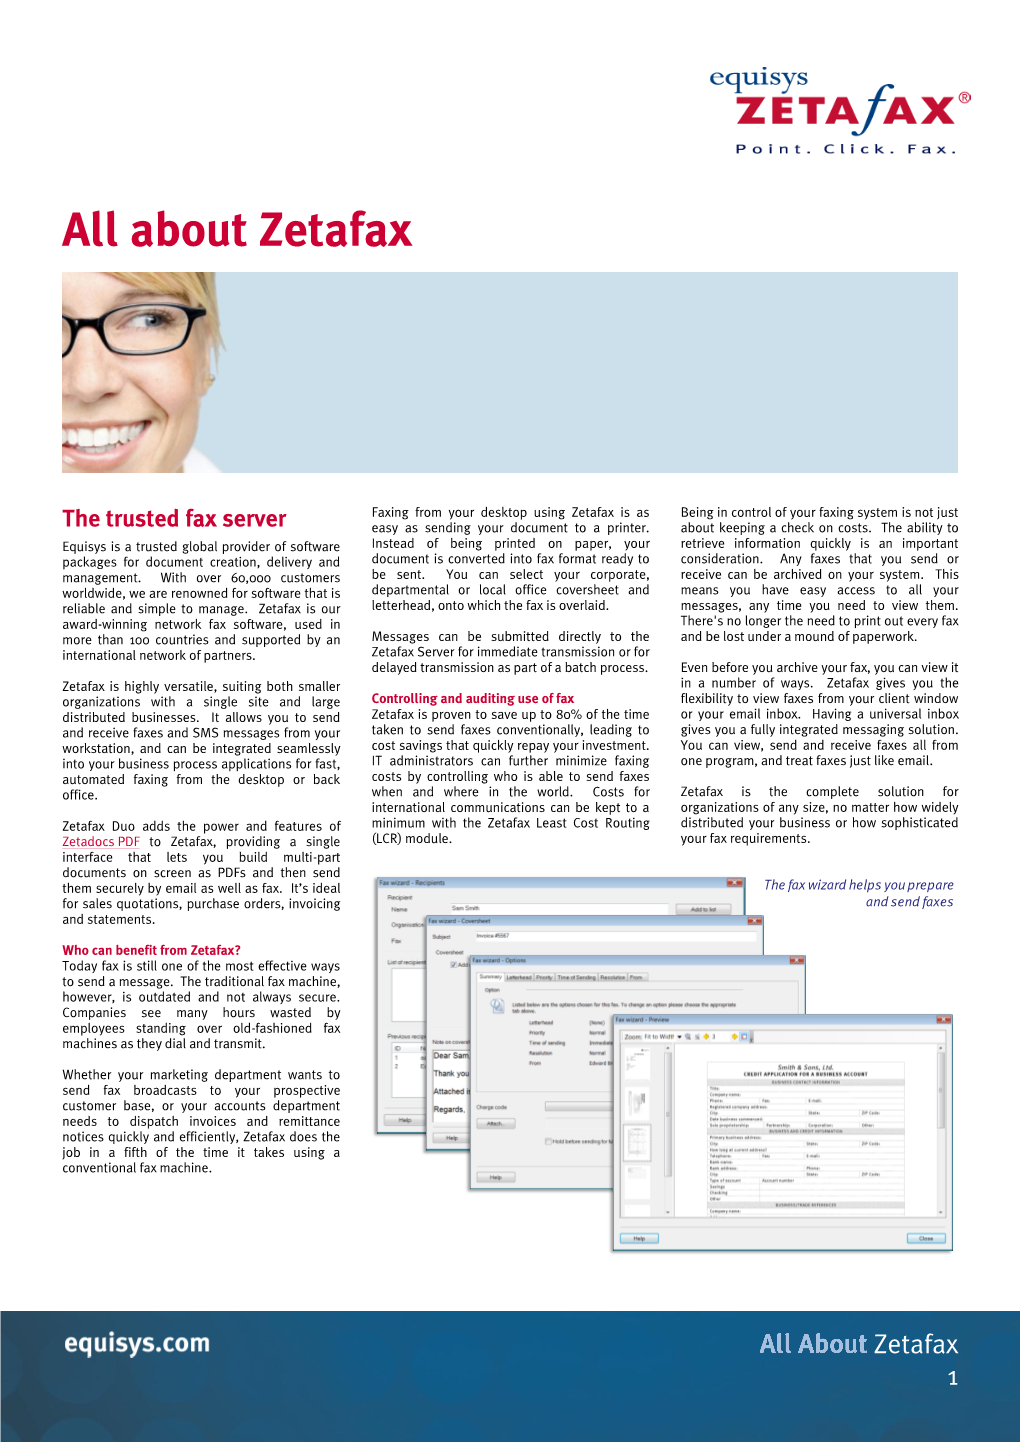 All About Zetafax